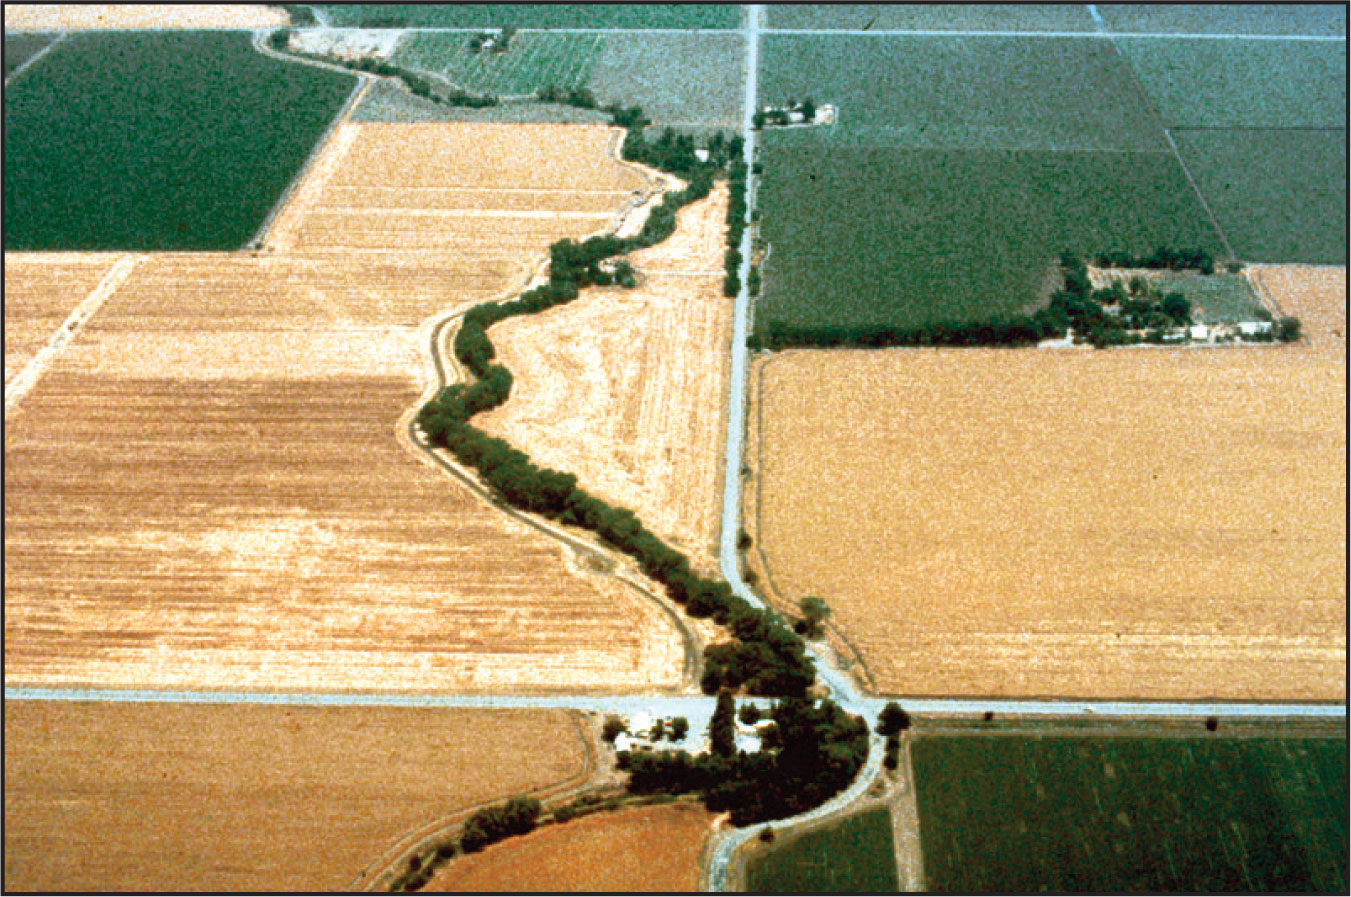 Aerial view of land showing sections of fields and trees that is typical Swainson's hawk habitat.